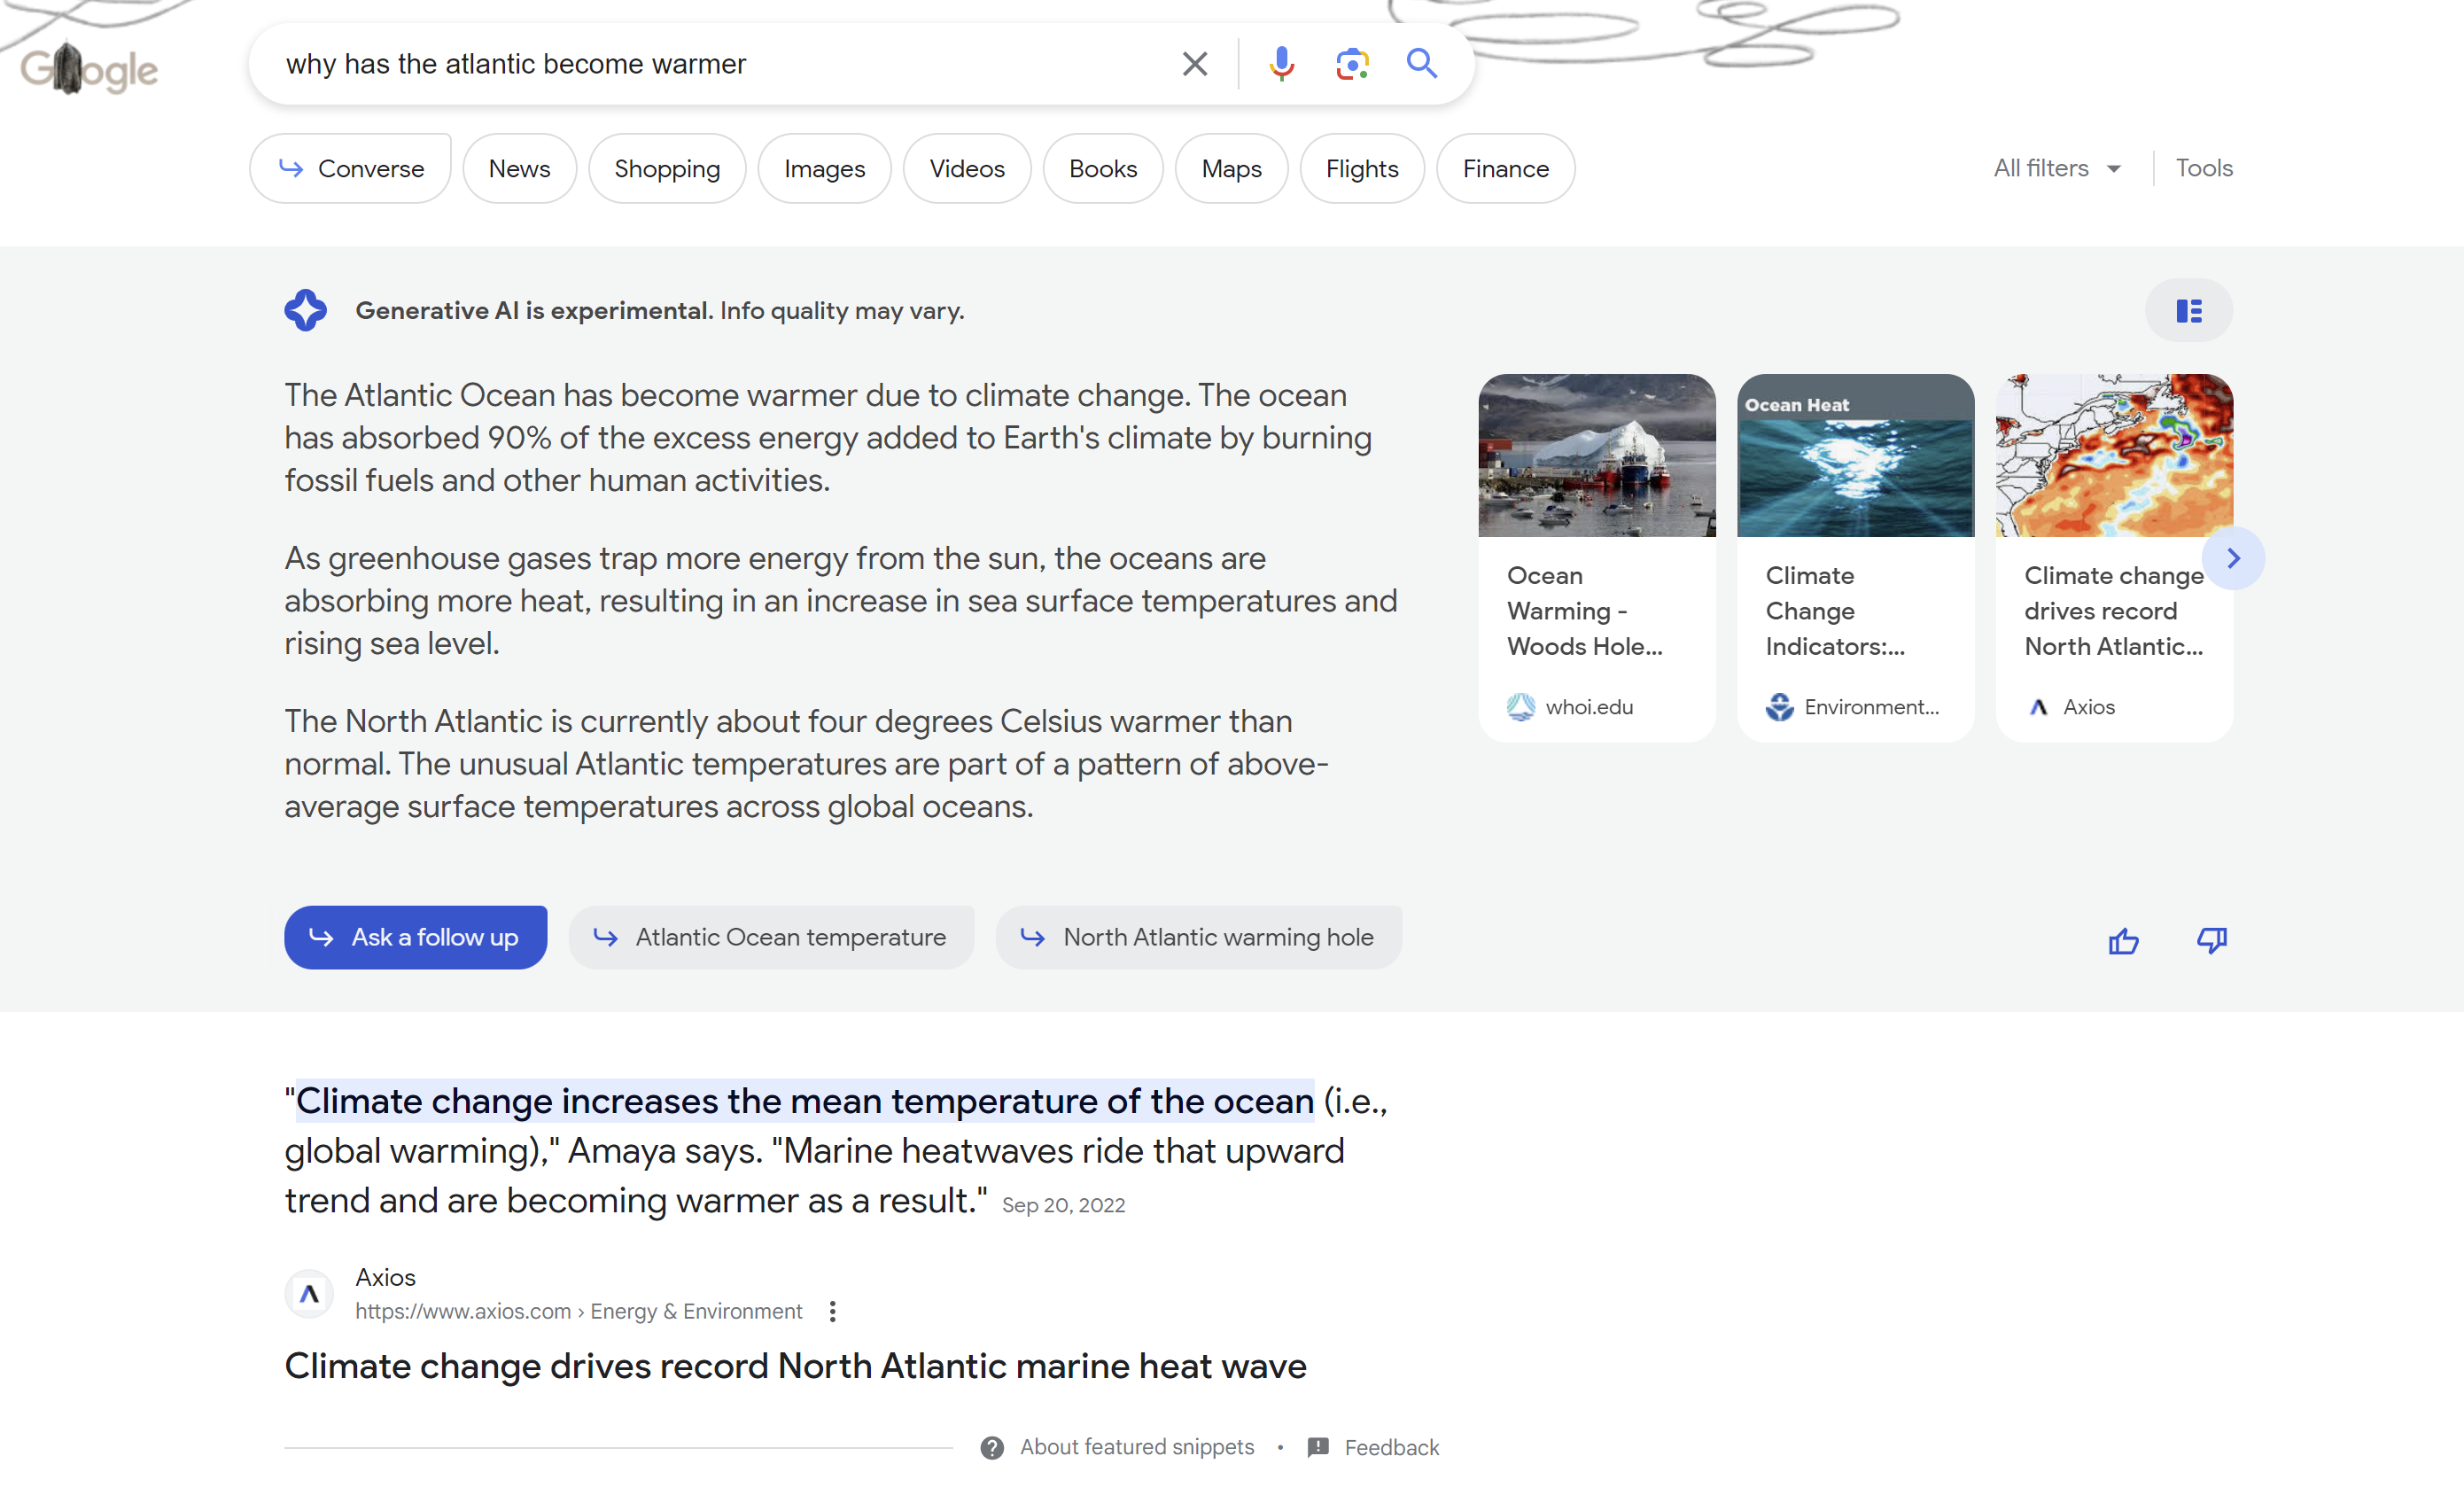 Google SGE: 'why has the atlantic become warmer'